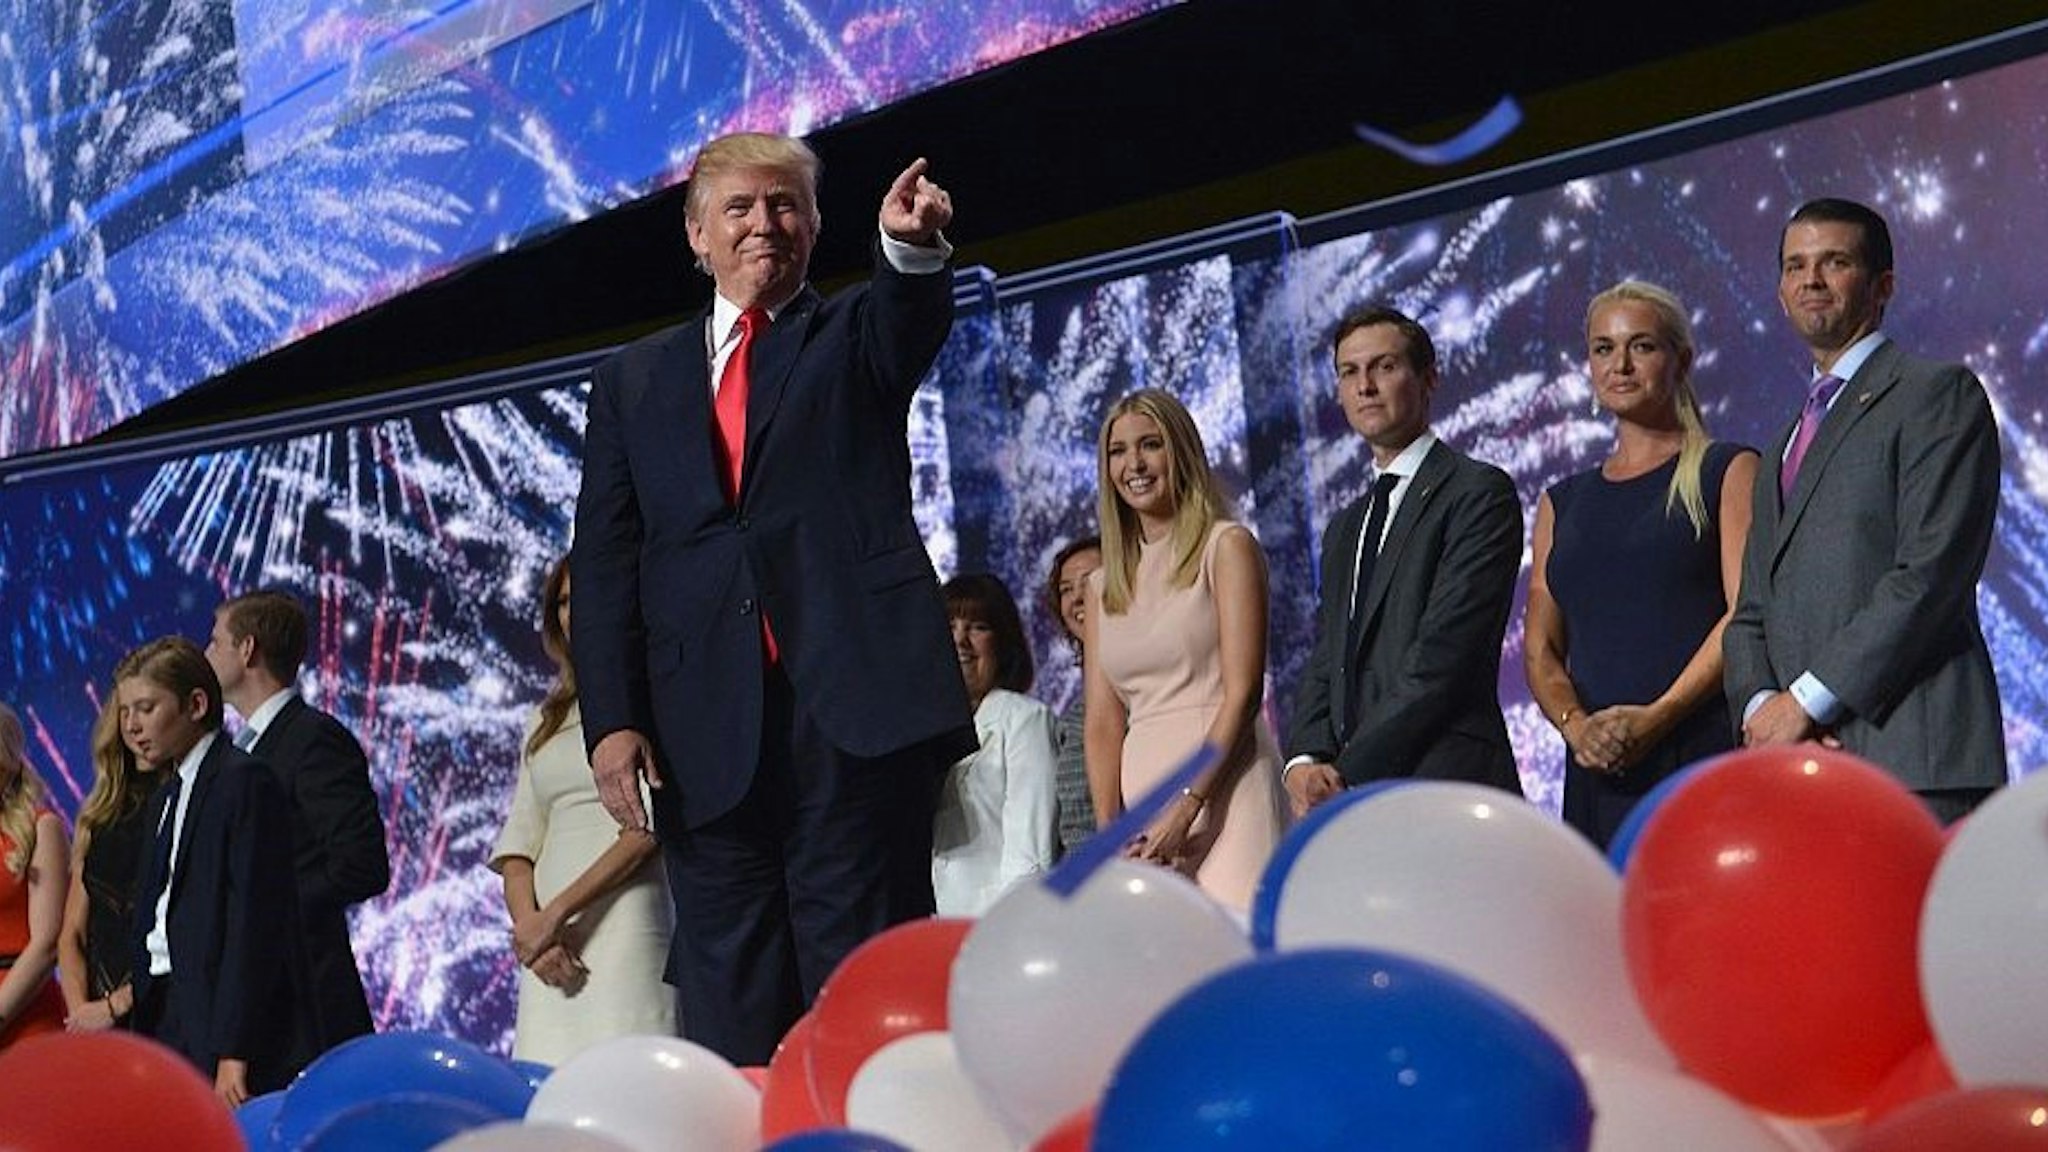 Republican Presidential candidate Donald Trump points at delegates after his acceptance speech during the 2016 Republican National Convention July 21, 2016 in Cleveland, Ohio. / AFP / Brendan Smialowski (Photo credit should read